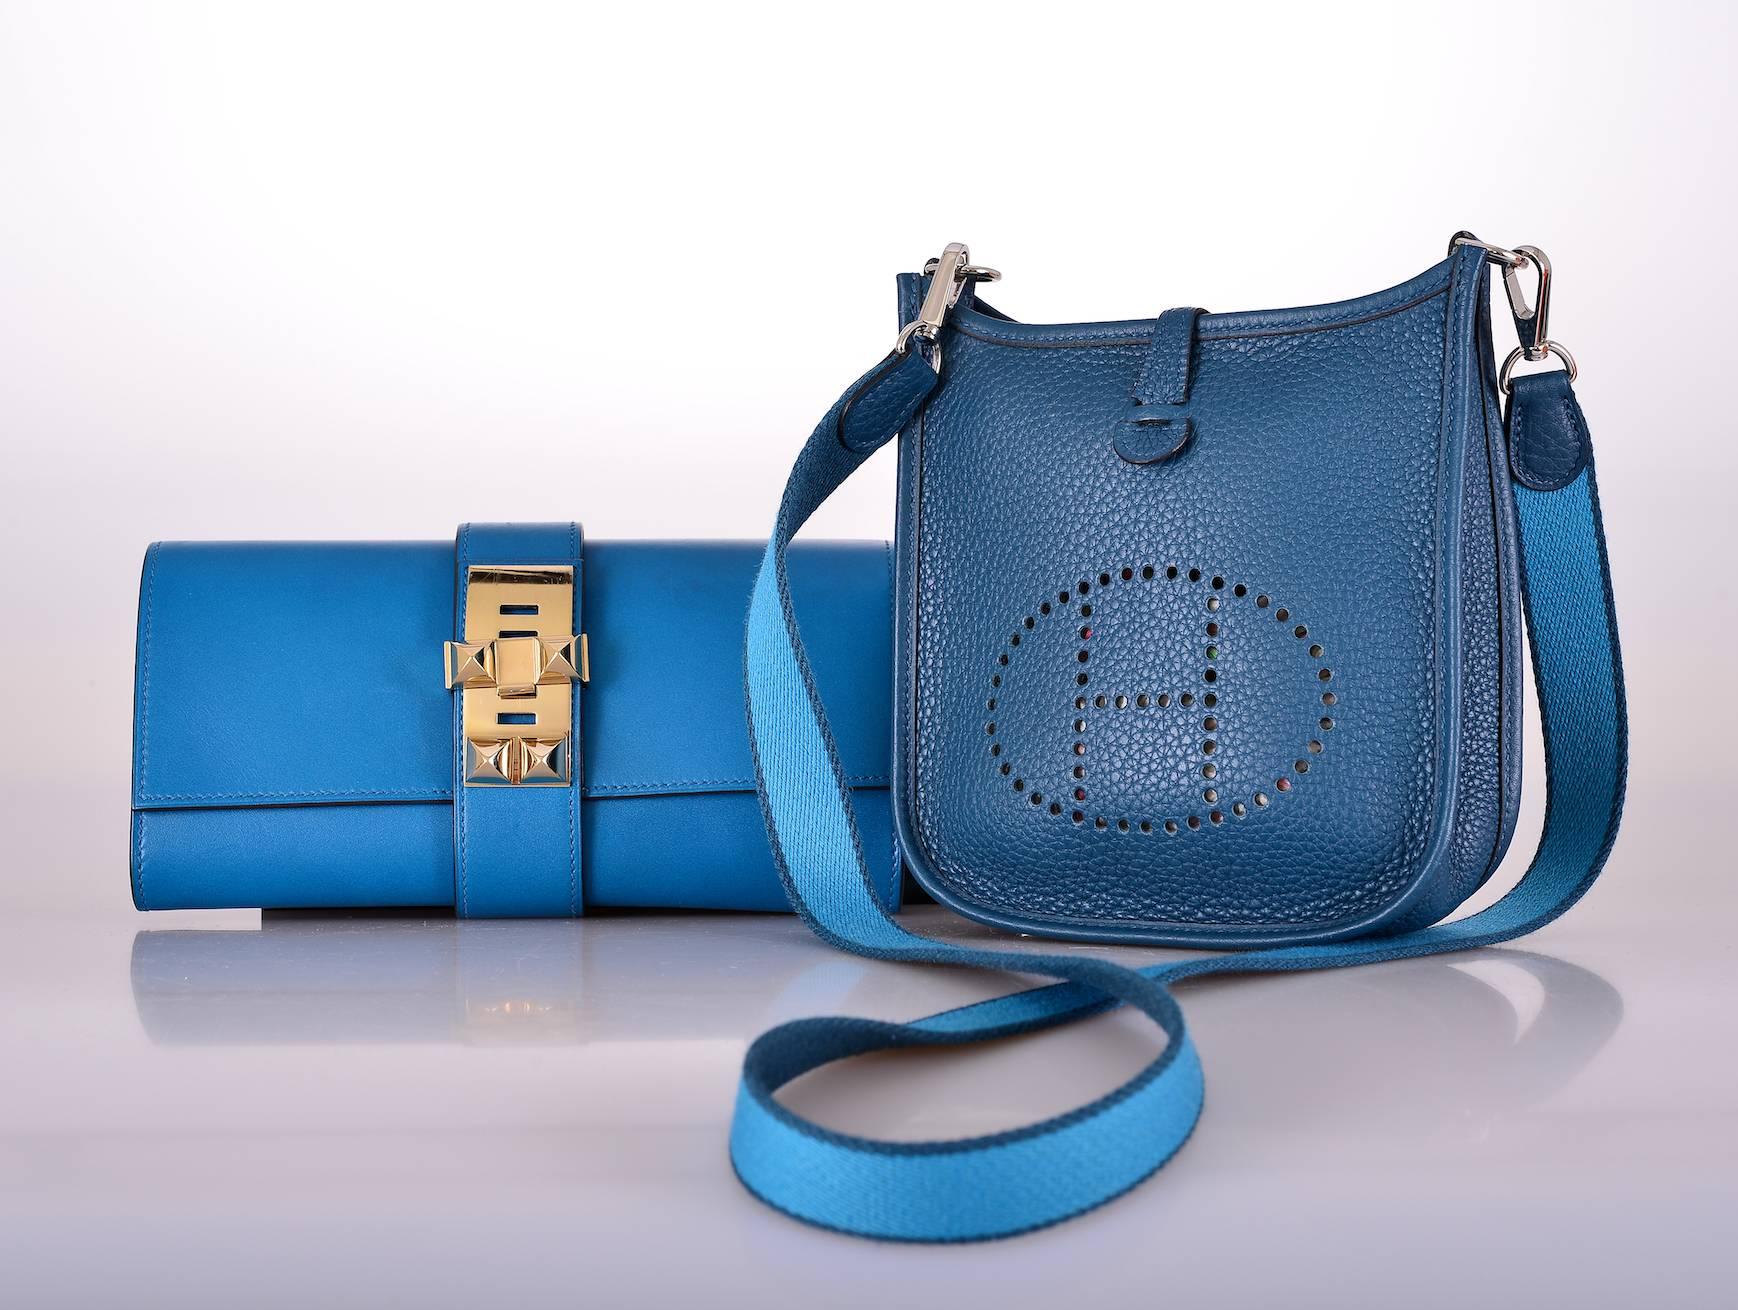 As always, another one of my fab finds! Hermes EVELYNE MINI IN GORGEOUS COLVERT BLUE /TURQUOISE & COLVERT STRAP.  Perfect cross body bag fits all the essentials: phone, wallet, lipstick, and credit card. THE LEATHER IS CLEMENCE. LOVE THE REMOVABLE